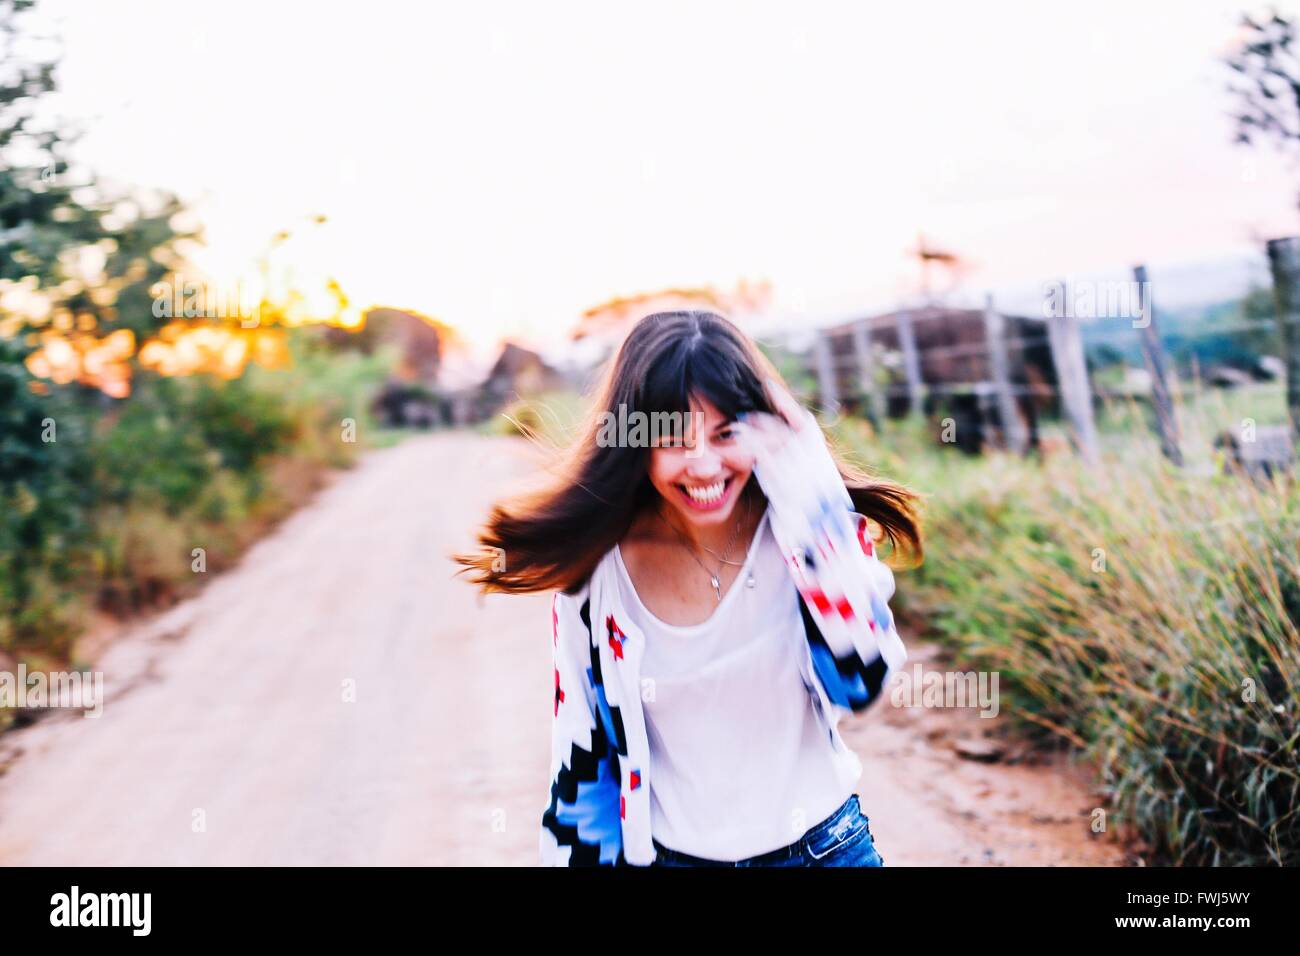 Portrait Of Happy Young Woman Running On Road Amidst Plants Against Clear Sky Stock Photo